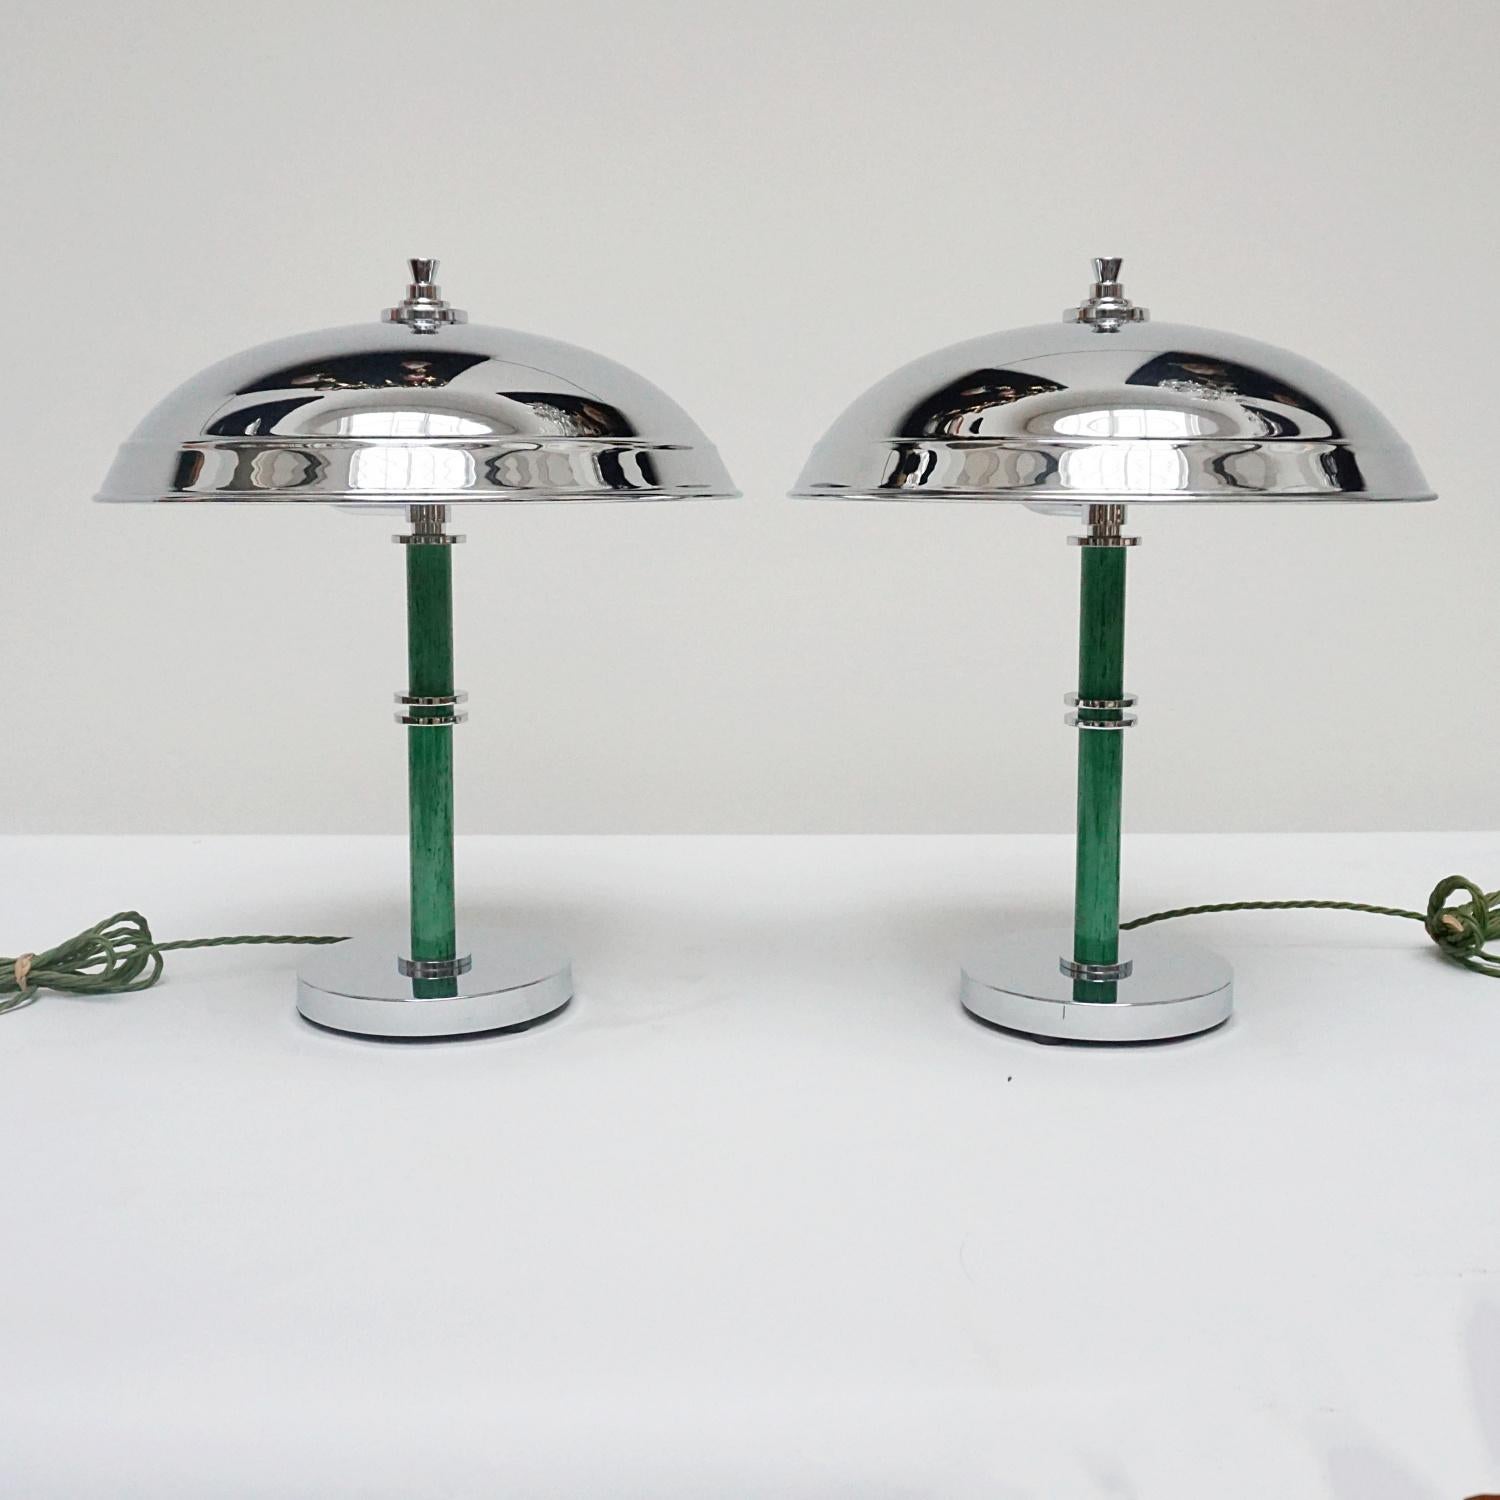 A pair of Art Deco style dome lamps. Mottled green bakelite stem with chrome banding, over a chromed metal circular base and a  chromed metal shade. chrome finial to top. 

Dimensions: H 44cm D of shade 35cm D of base 15cm

Origin: English

Item